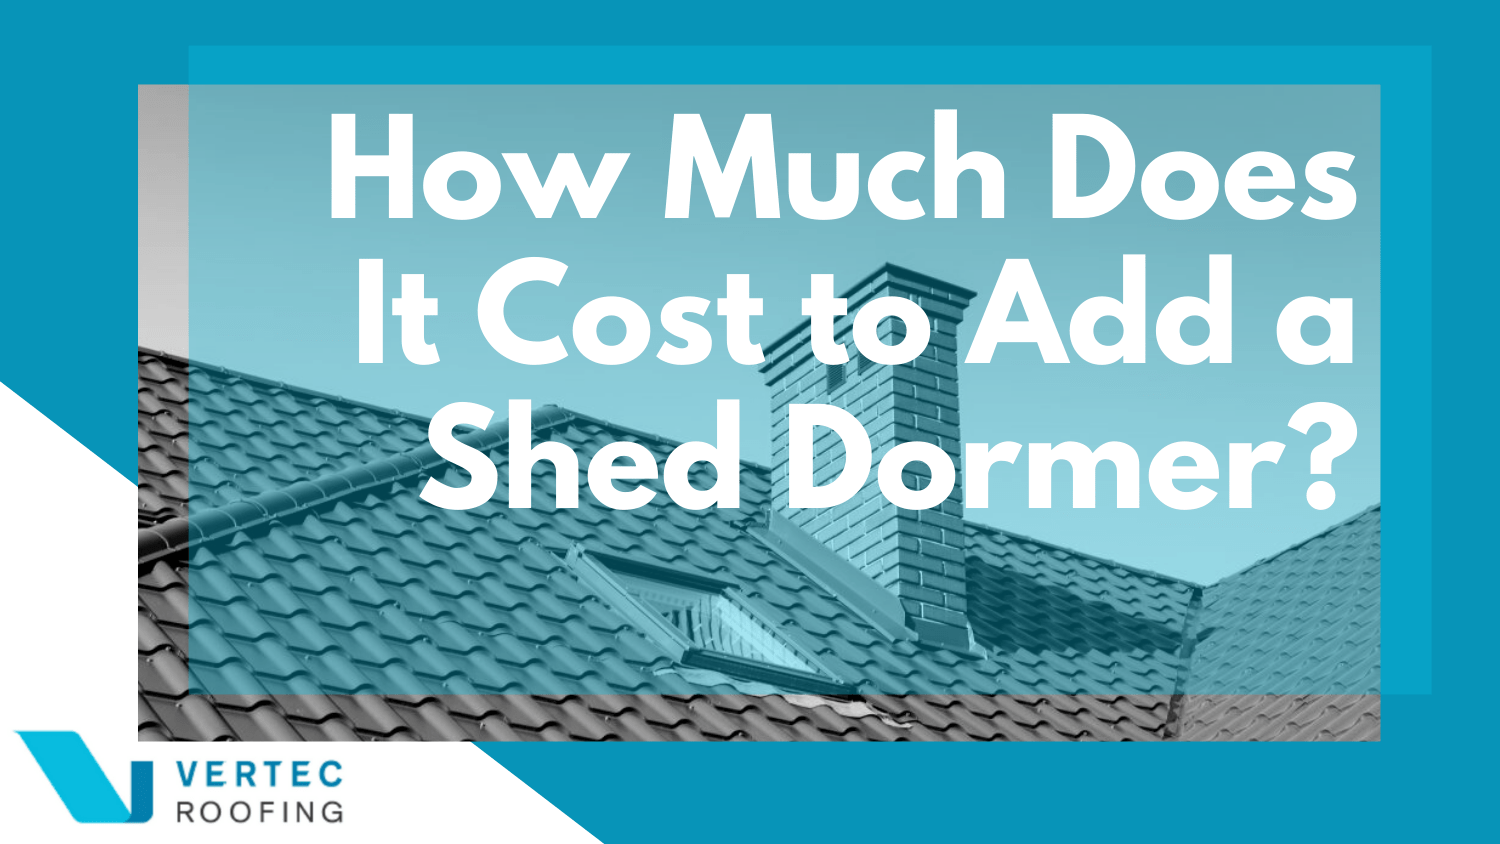 How Much Does It Cost to Add a Shed Dormer?